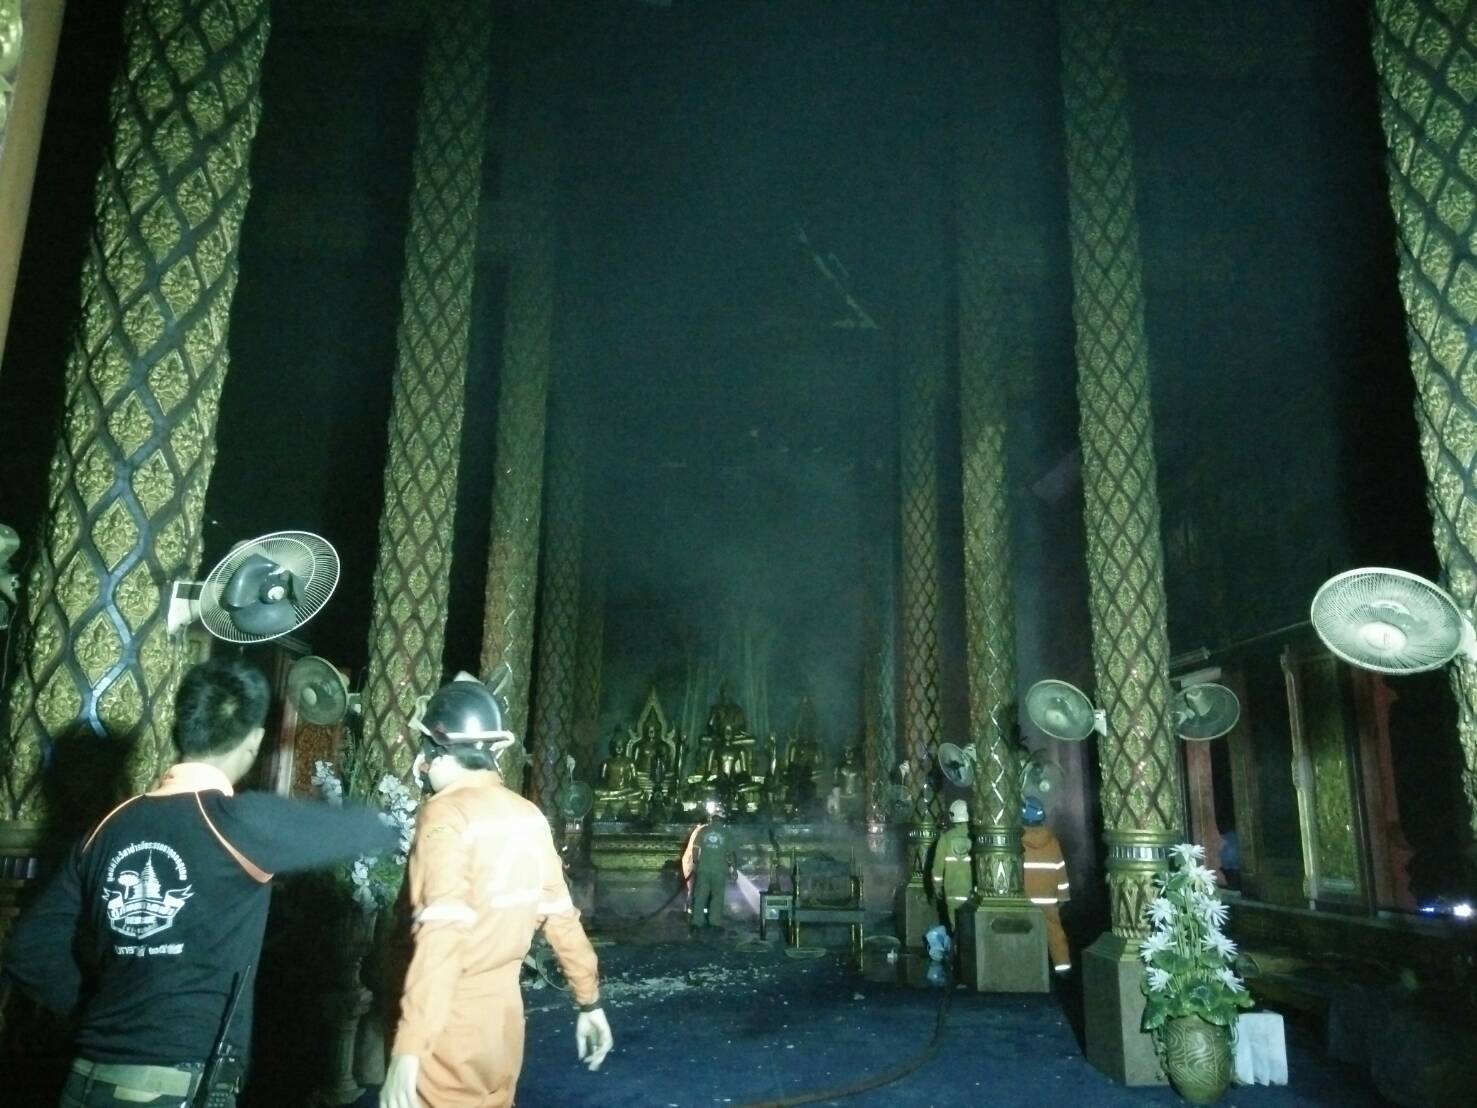 Fire in temple